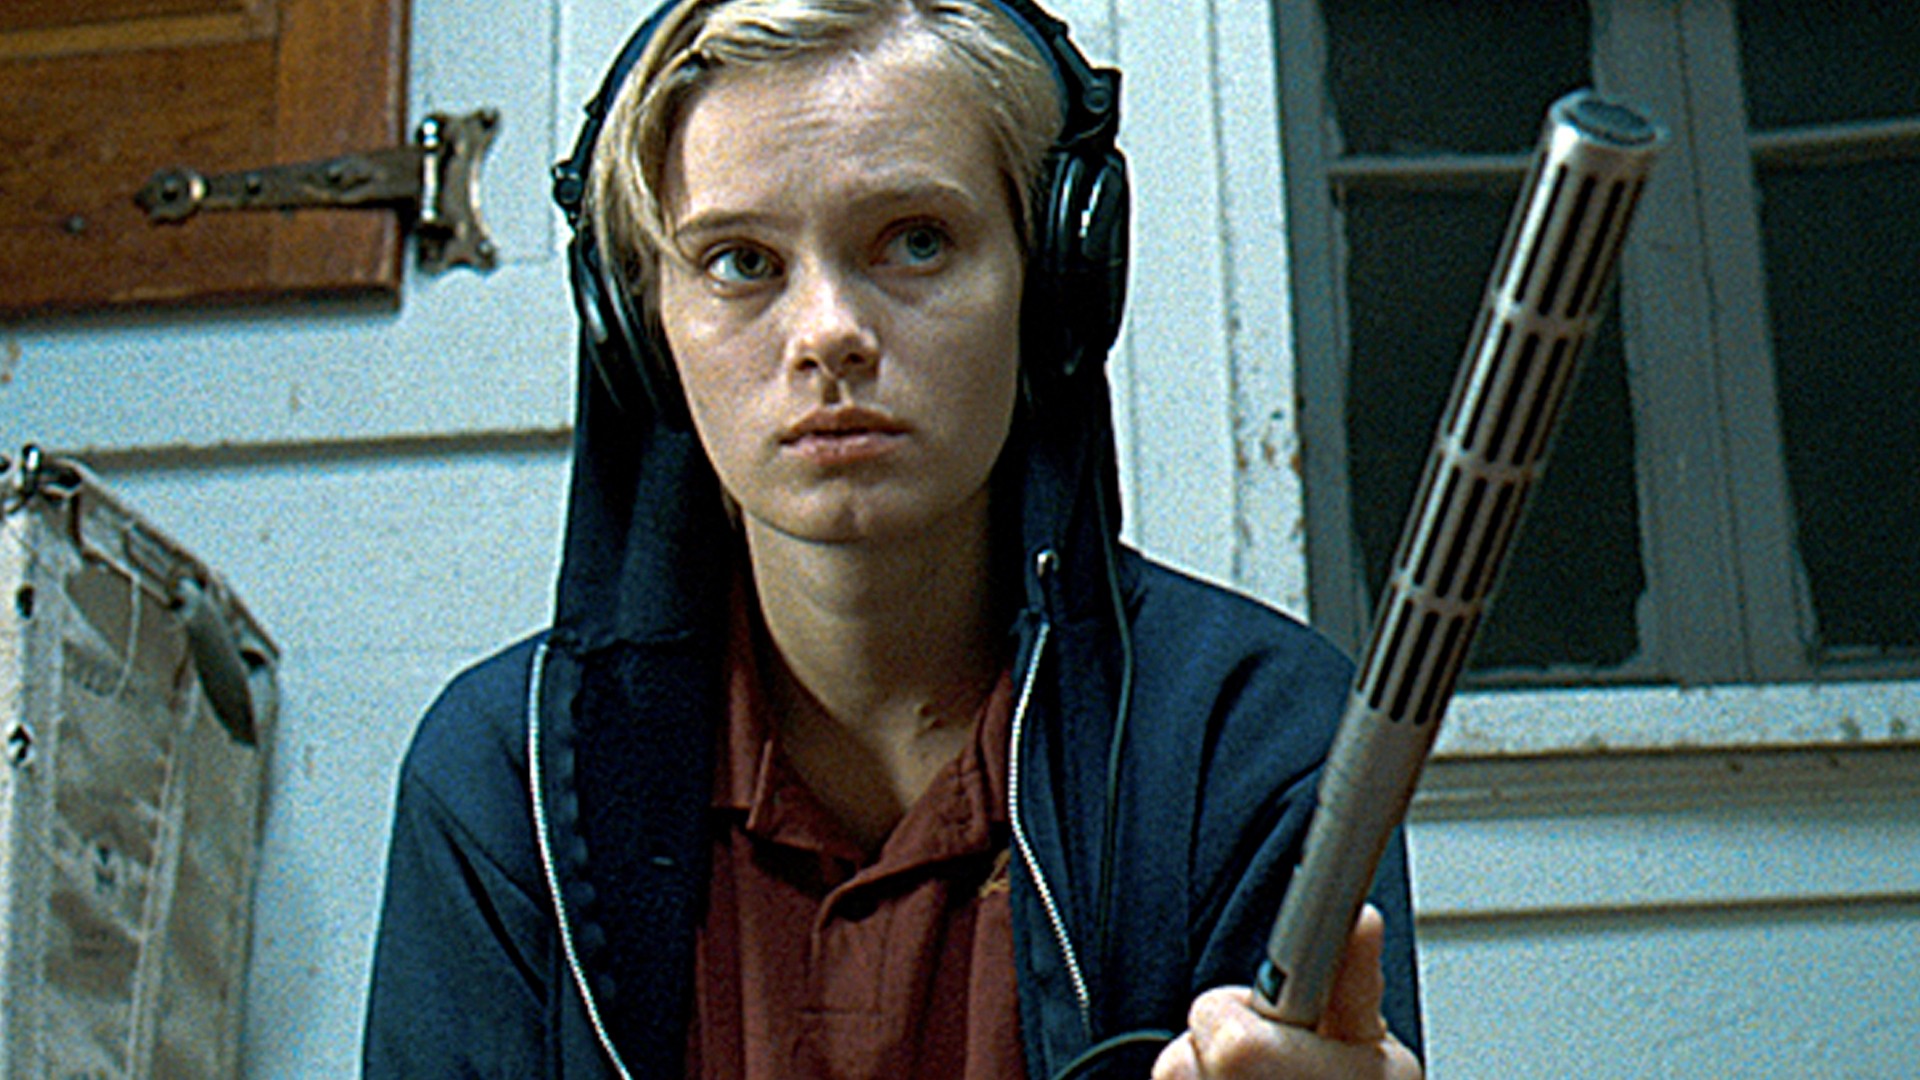 Ti West’s The Innkeepers Finds Horror in the Running of a Dying Hotel